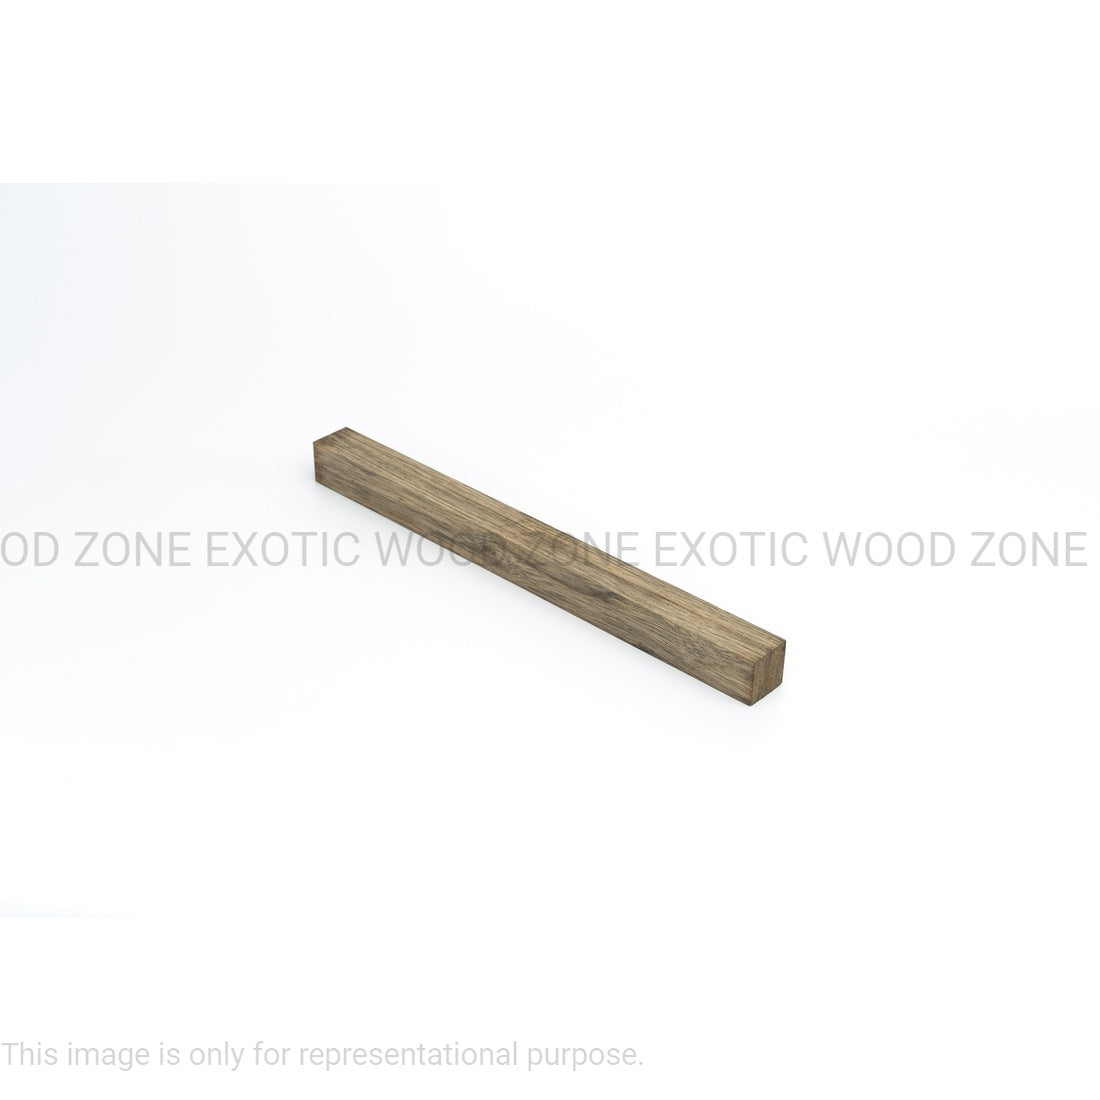 Black Limba Hobbywood Blank 1&quot; x 1 &quot; x 12&quot; inches Exotic Wood Zone